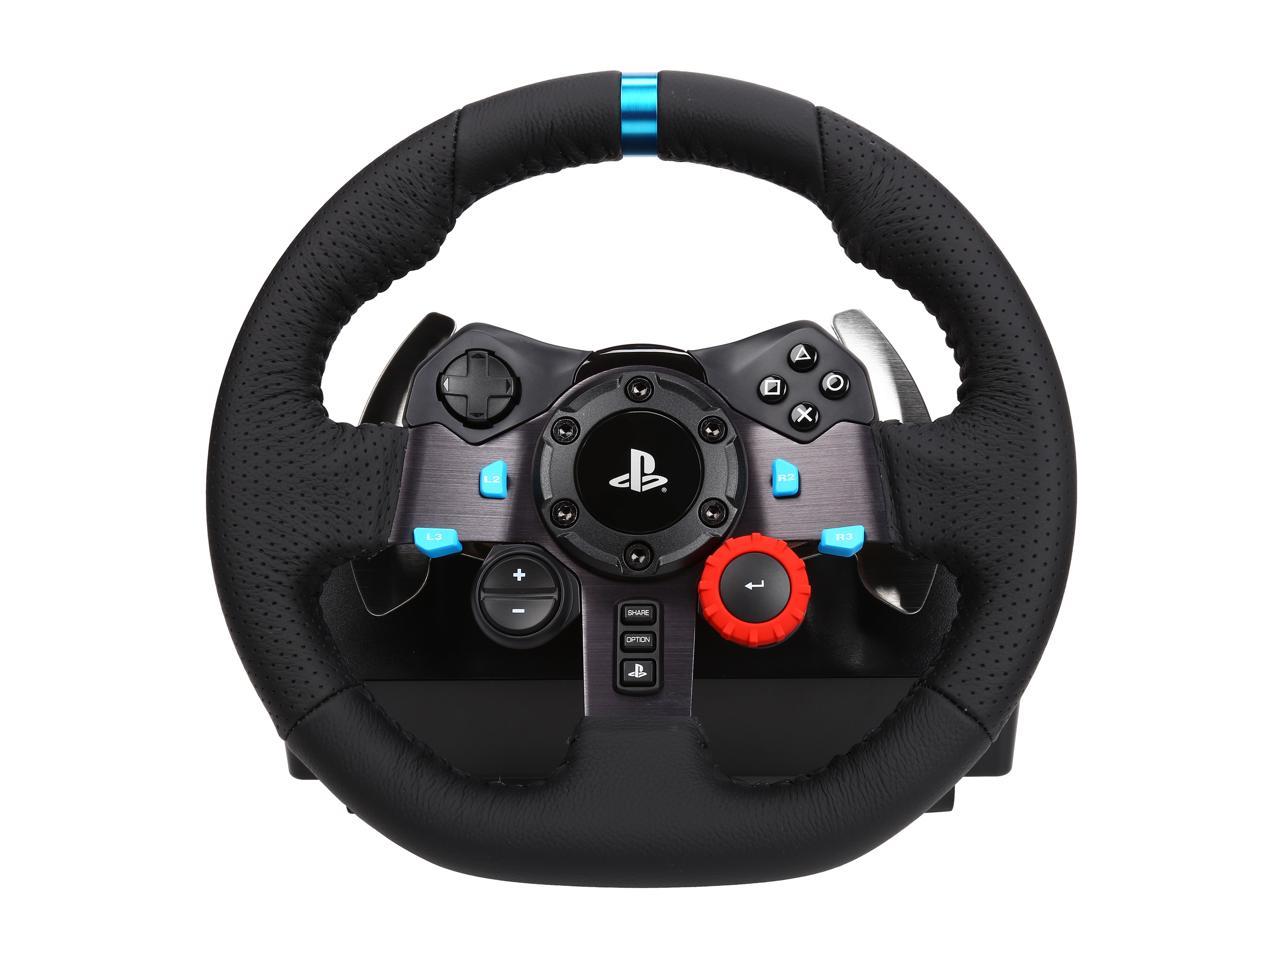 Logitech G29 Driving Force Racing Wheel for PS4, PS3, PC (941-000110)